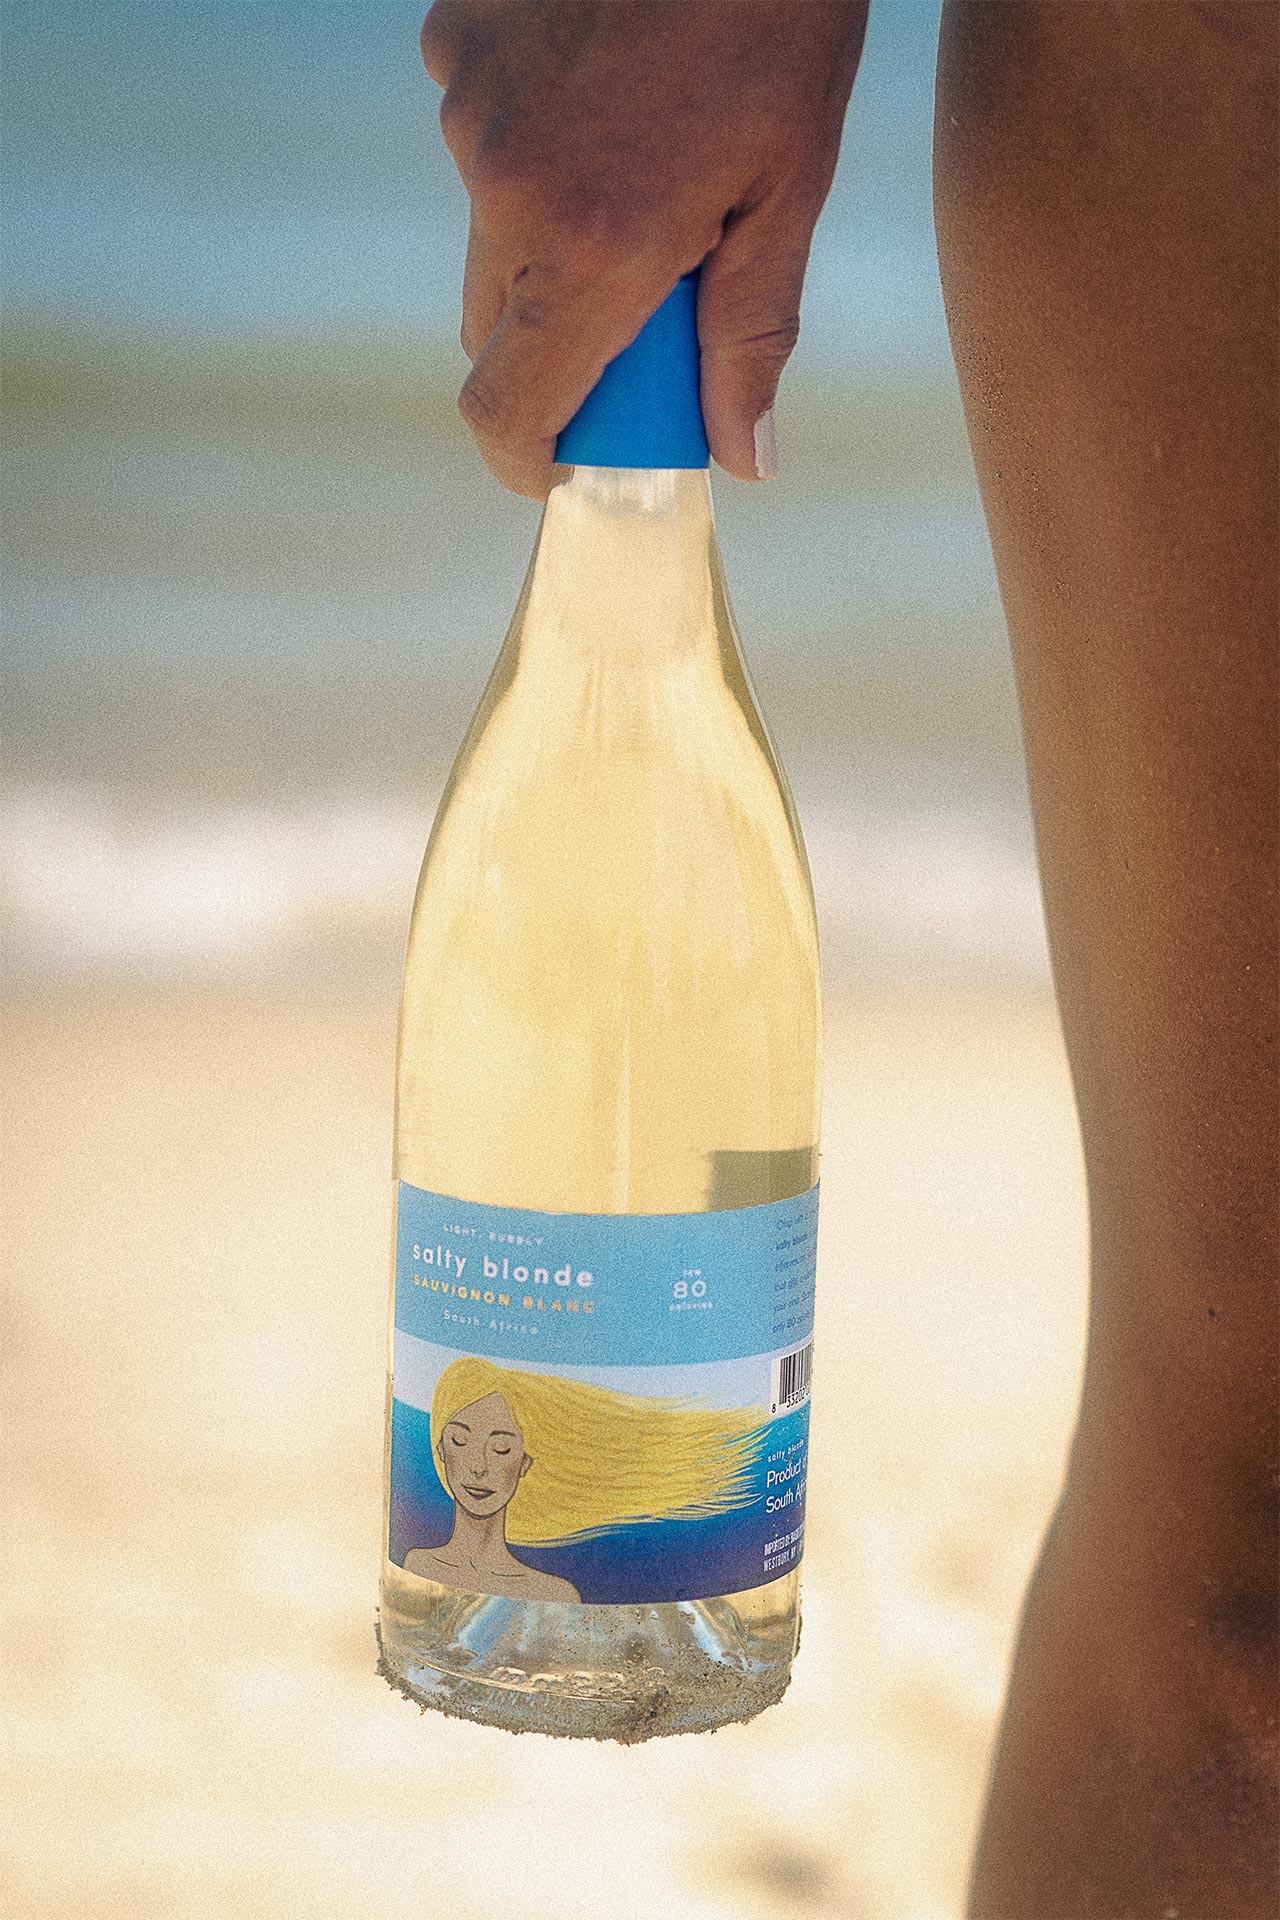 salty blonde wine bottle in woman's hand at beach